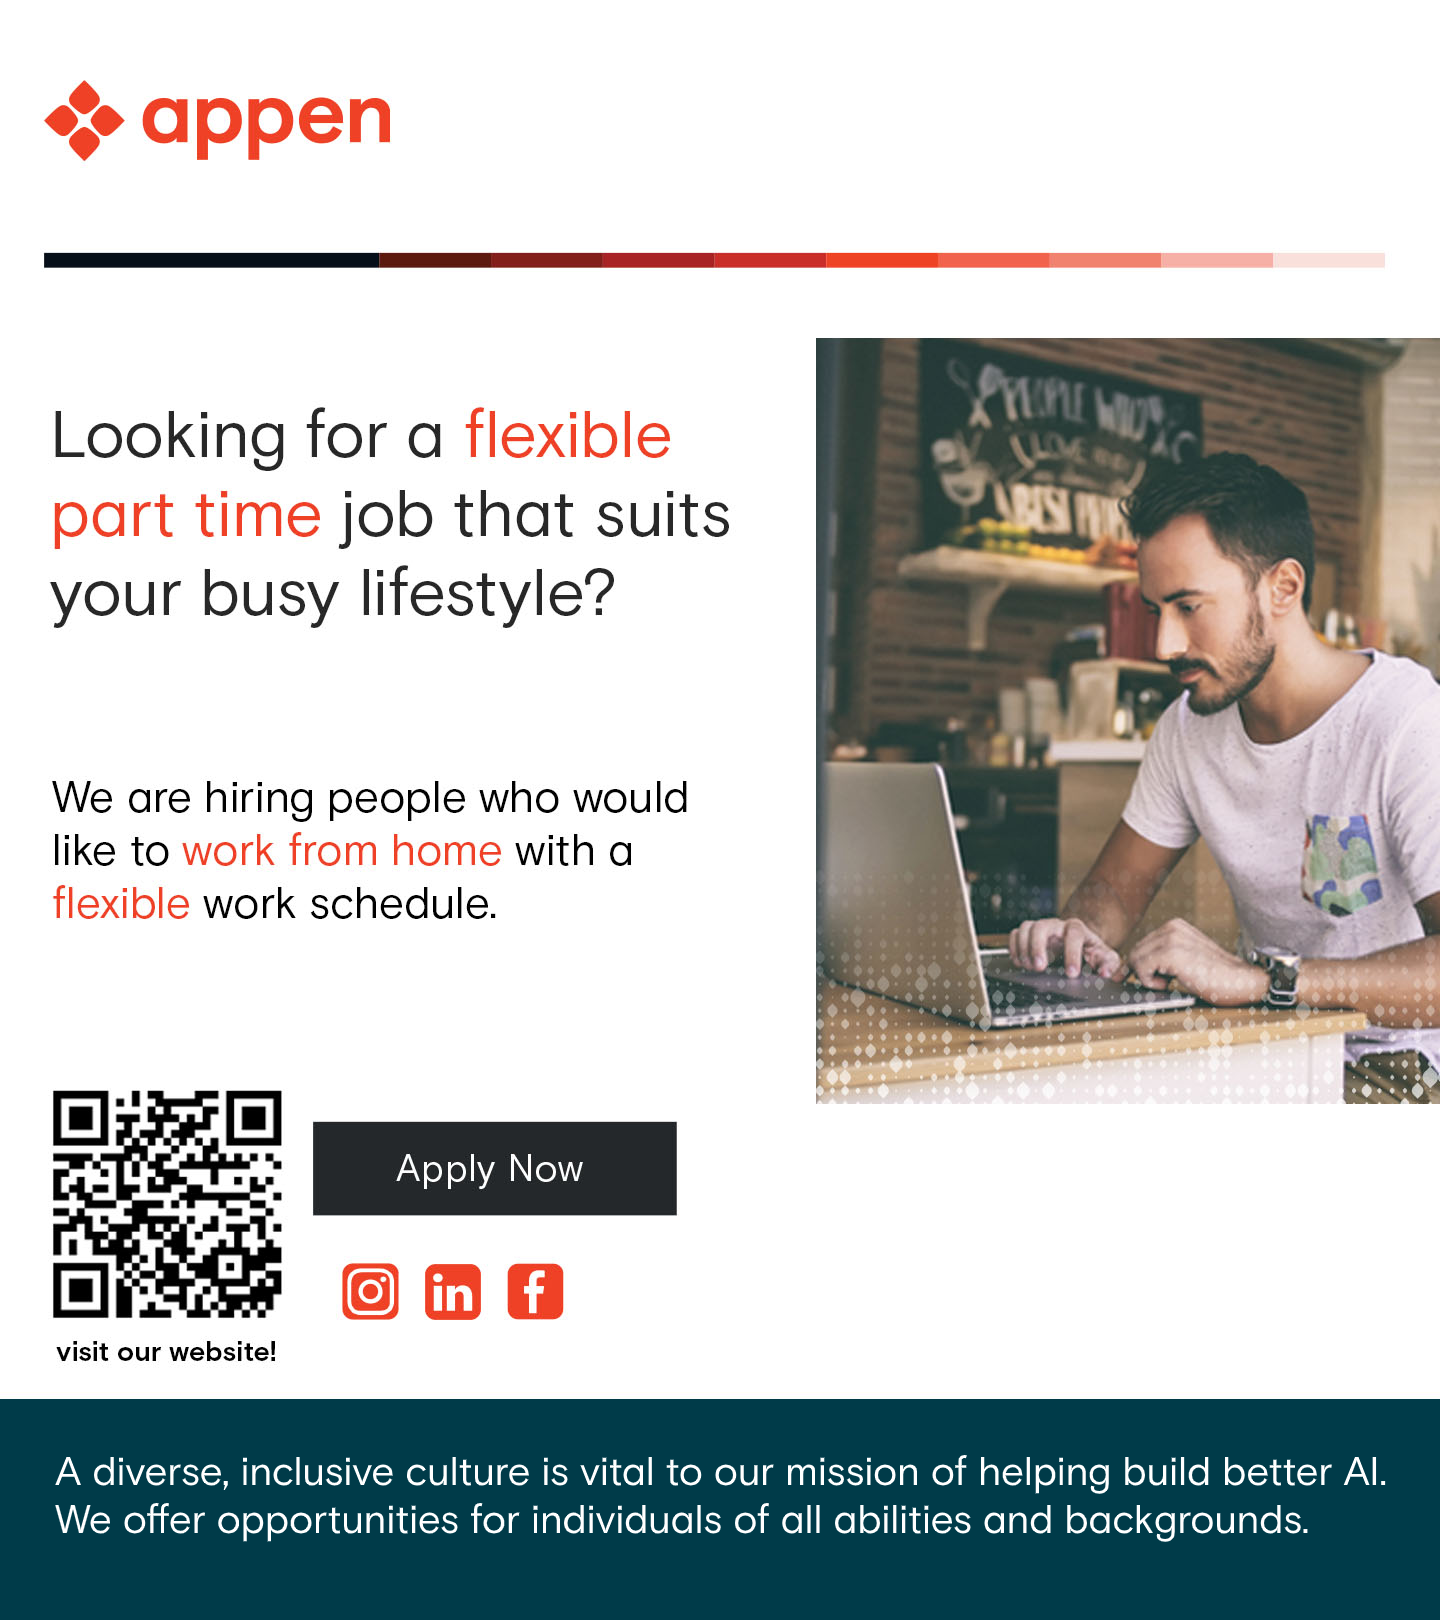 <> appen

 

Looking for a flexible
part time job that suits
your busy lifestyle?

We are hiring people who would
like to work from home with a
flexible work schedule.

 

   

visit our website!

A diverse, inclusive culture is vital to our mission of helping build better Al.

We offer opportunities for individuals of all abilities and backgrounds.